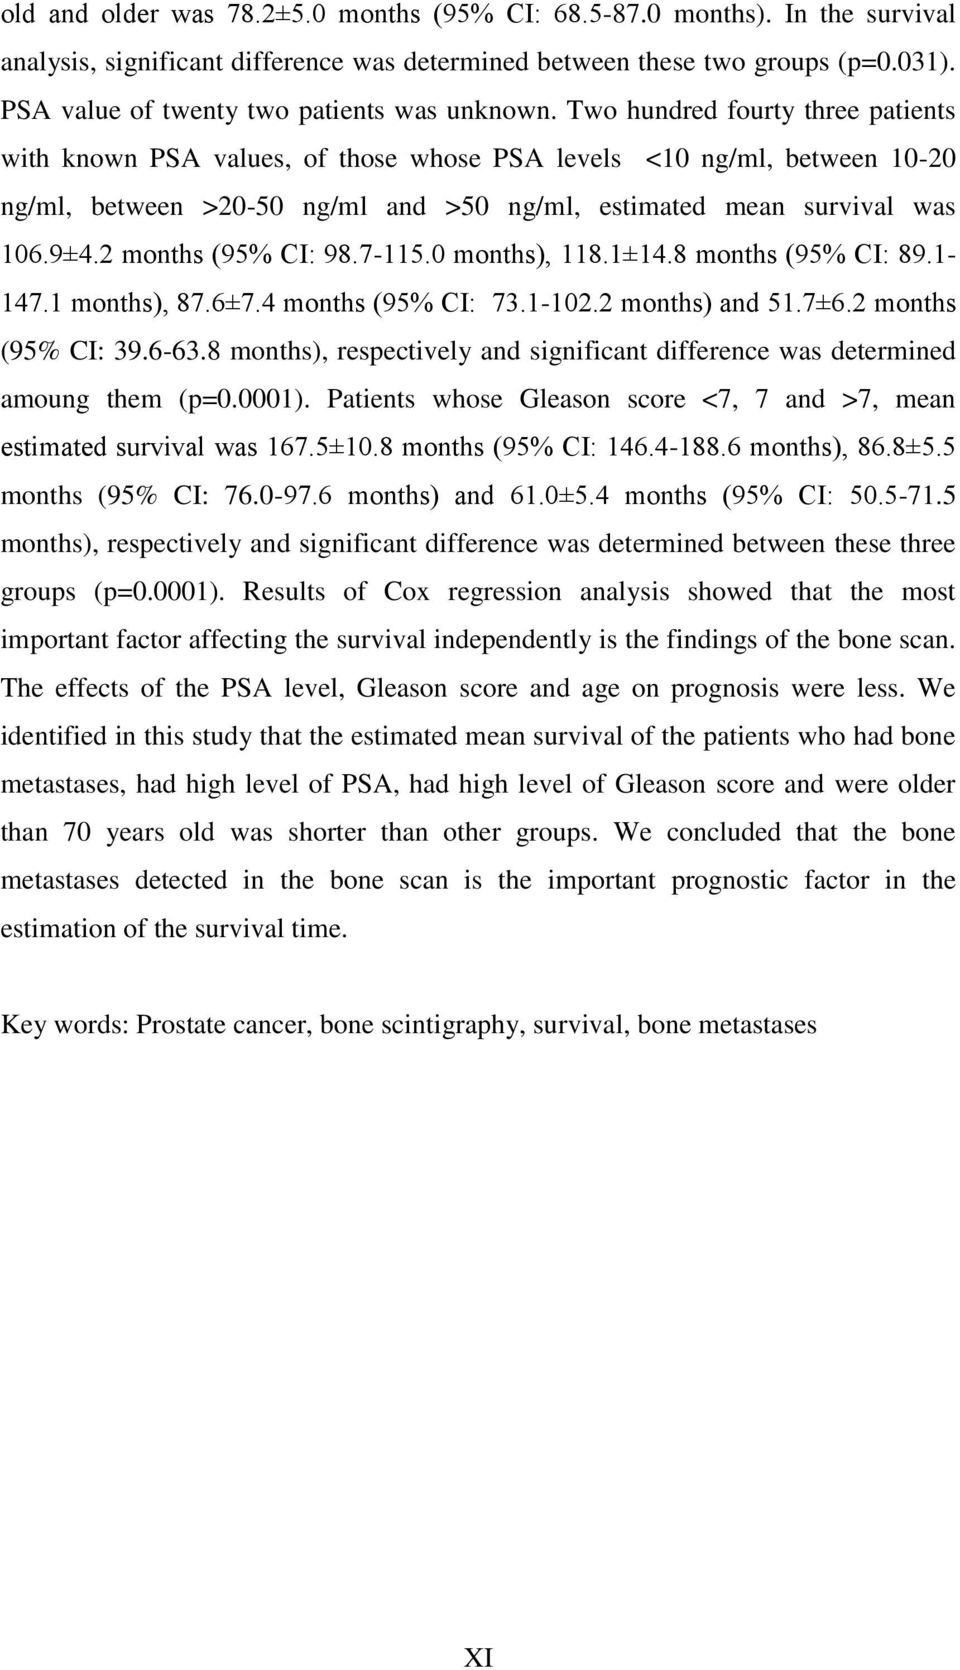 Two hundred fourty three patients with known PSA values, of those whose PSA levels <10 ng/ml, between 10-20 ng/ml, between >20-50 ng/ml and >50 ng/ml, estimated mean survival was 106.9±4.